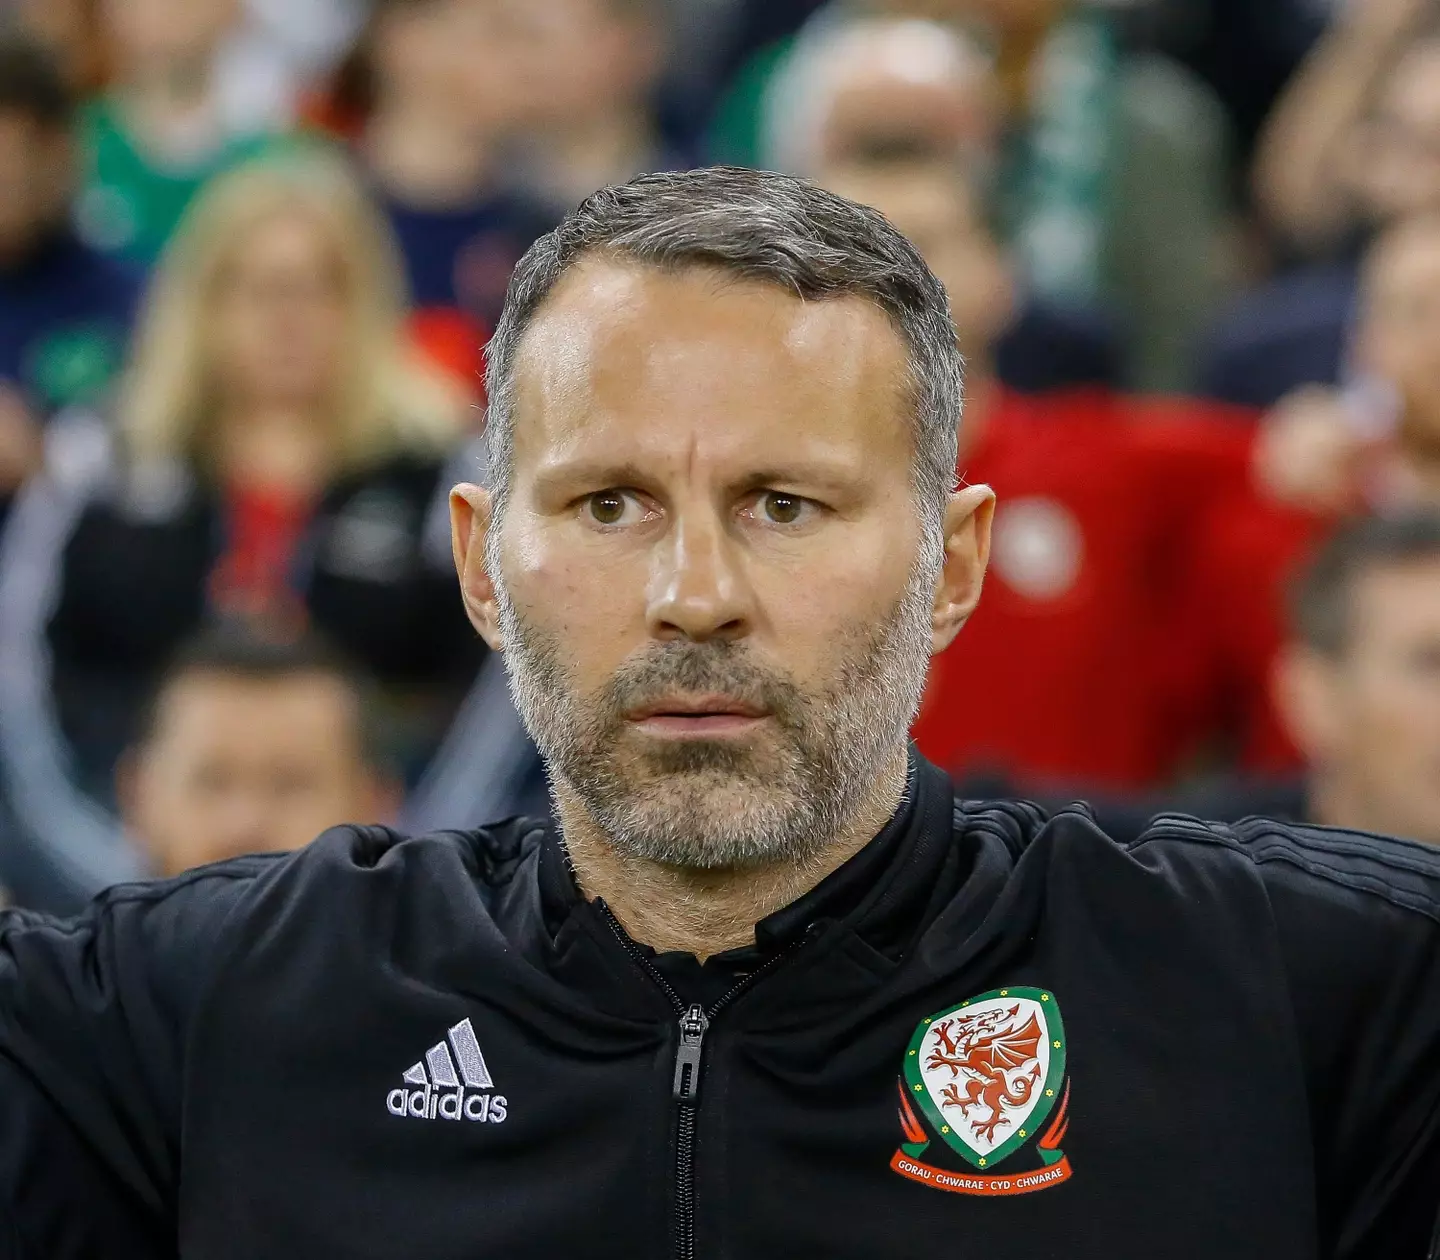 Giggs stepped down as manager of Wales last month (Image: Alamy)